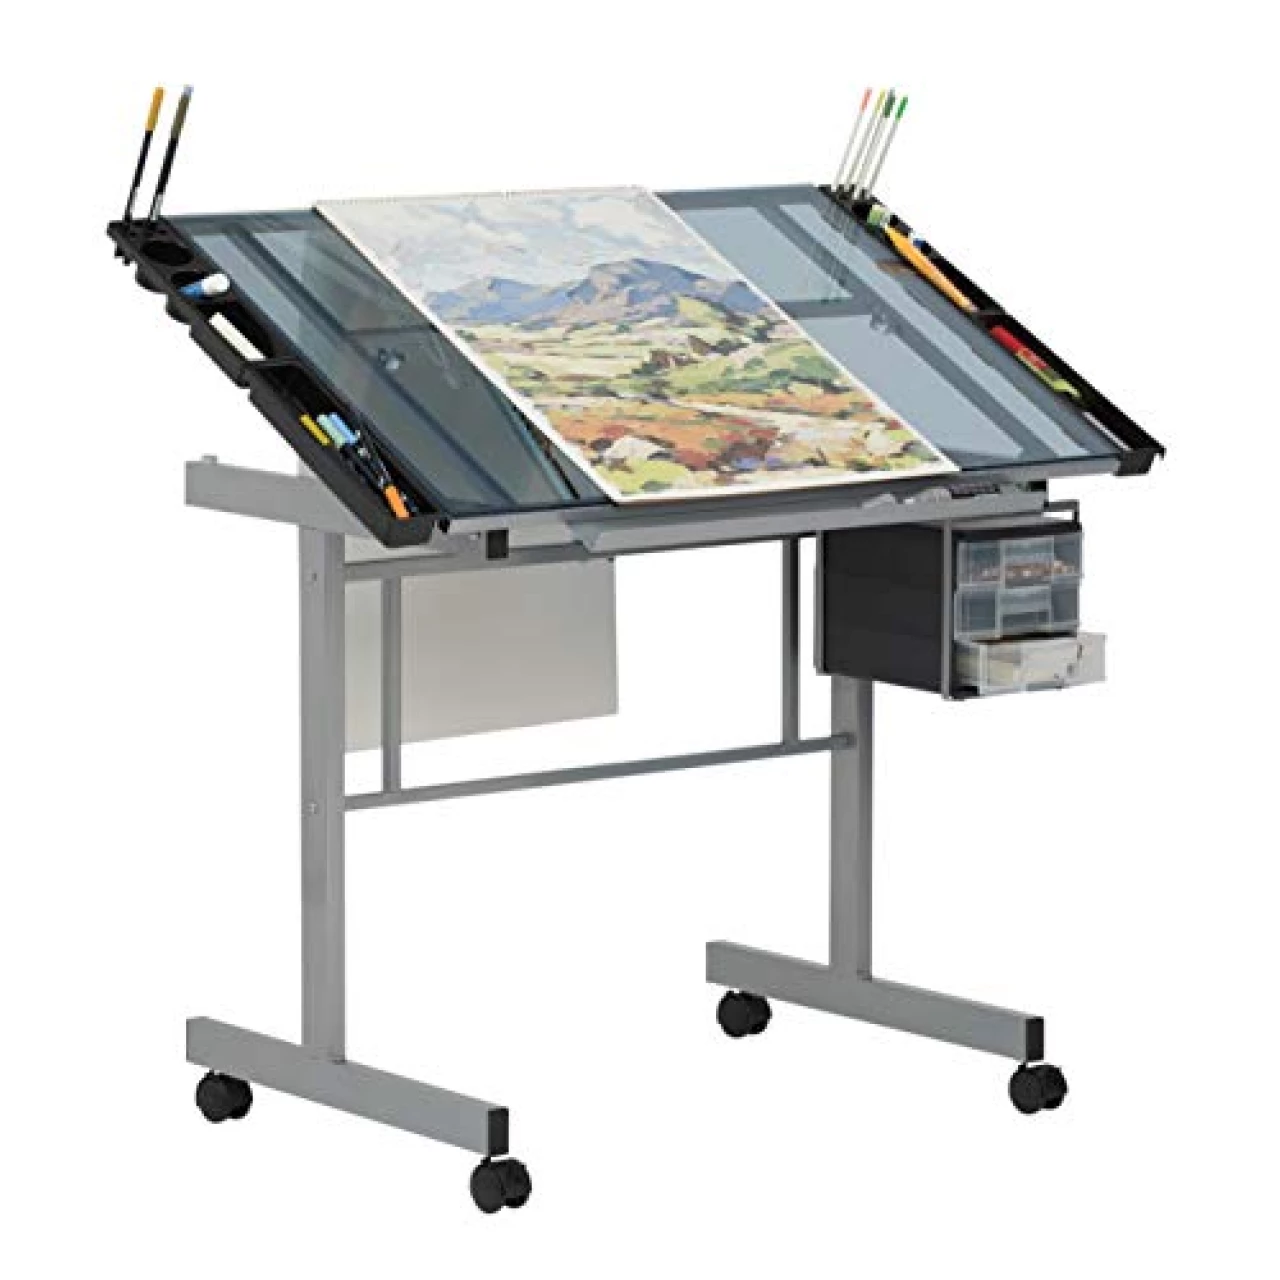 Studio Designs Vision Craft and Drawing Station - 35.5&quot; W by 23.75&quot; D Silver-Blue Glass Top Drafting Table with Pencil Drawers, Side Trays, &amp; Built-In Pencil Ledge - Angle Adjustable Work Surface